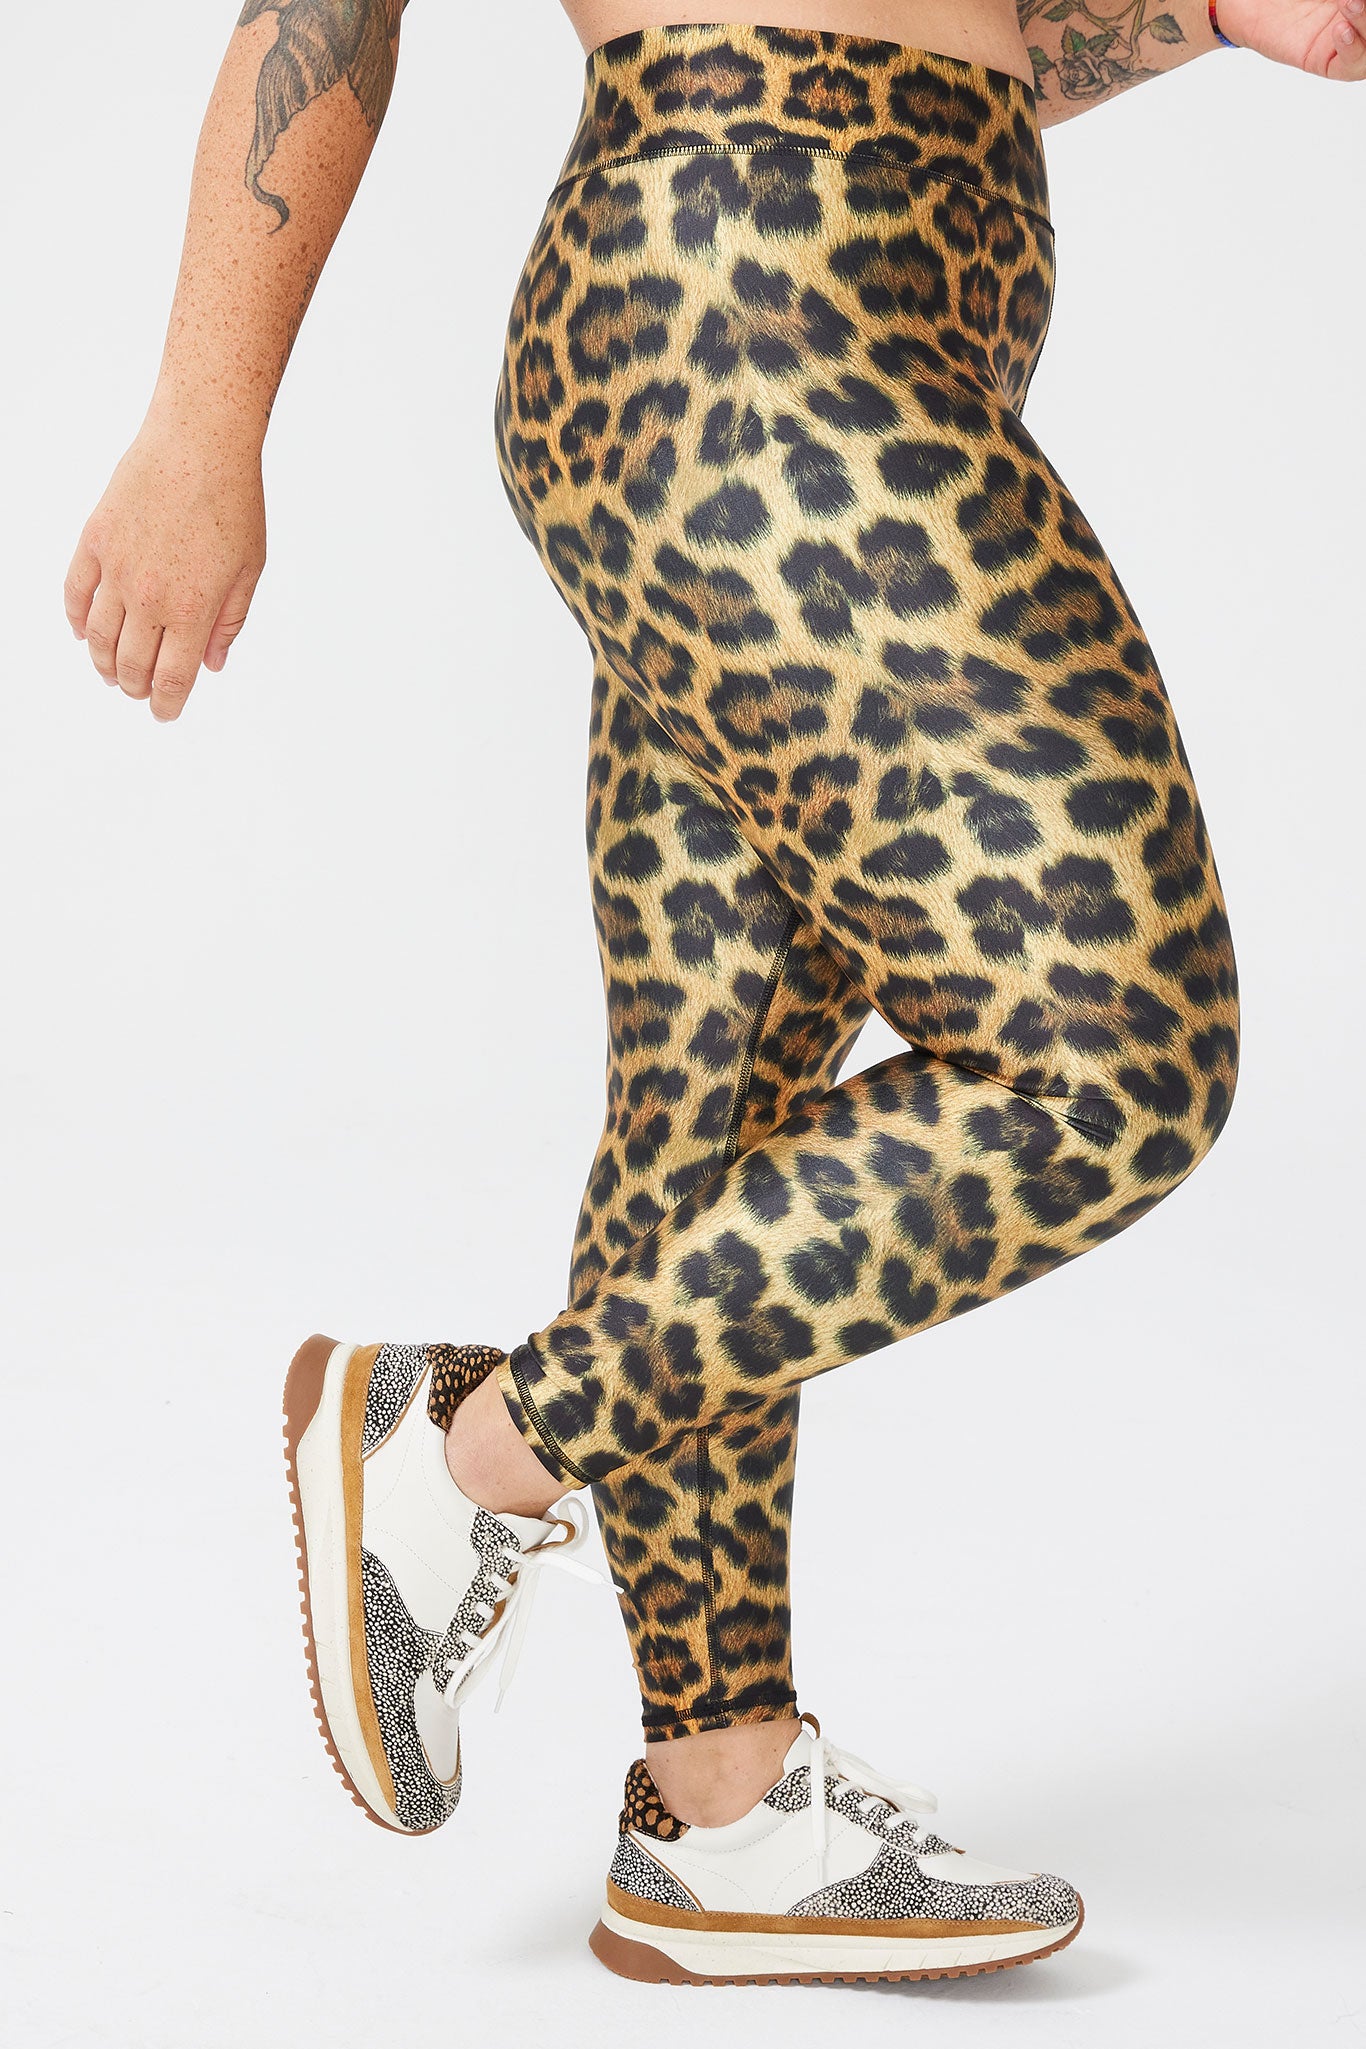 Colourful leopard leggings for a woman. The coolest